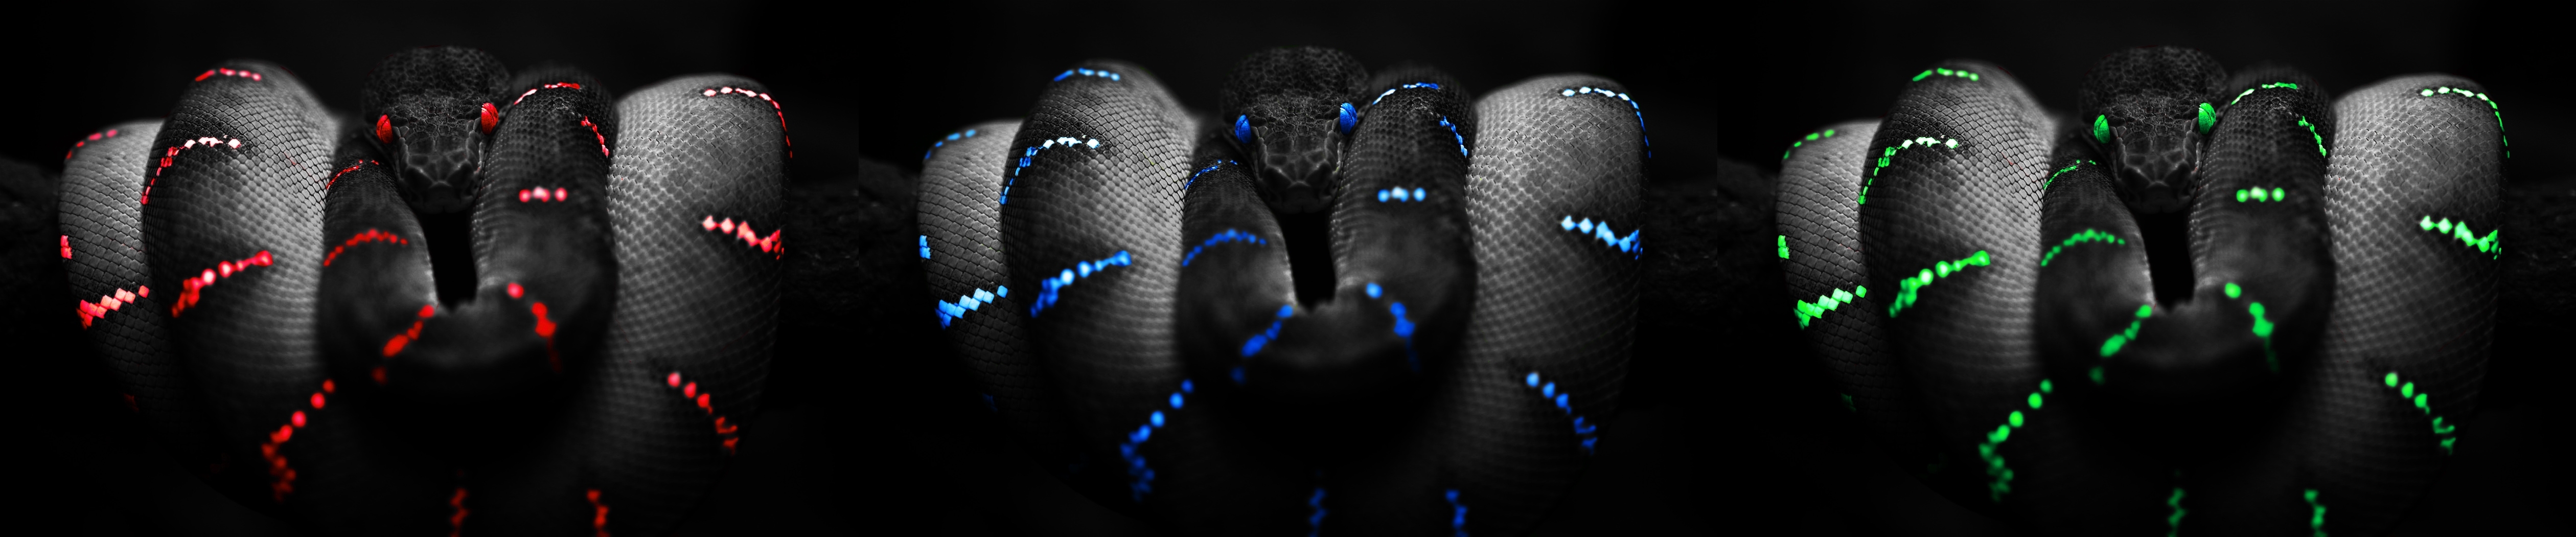 art rainbow of snakes 5040x1050 5040x1050 wallpapers High Quality